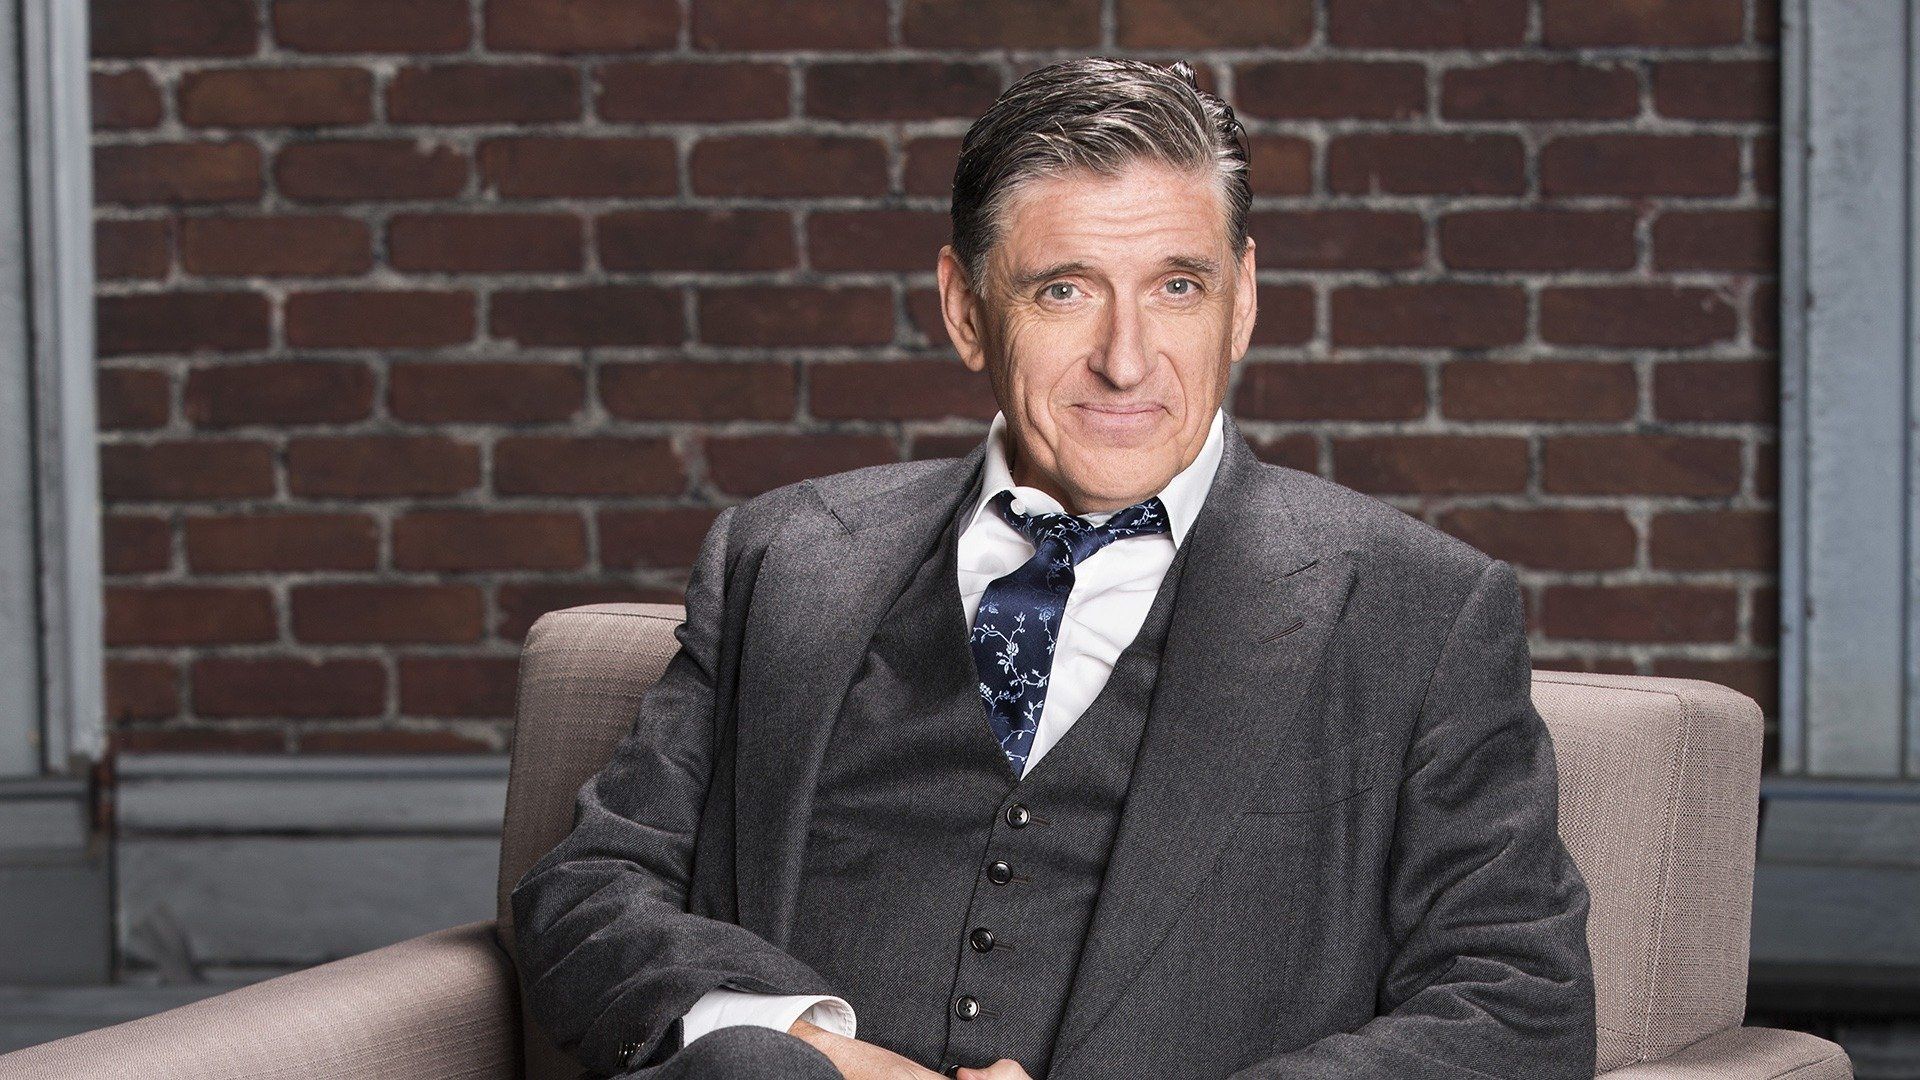 Join or Die with Craig Ferguson Backdrop